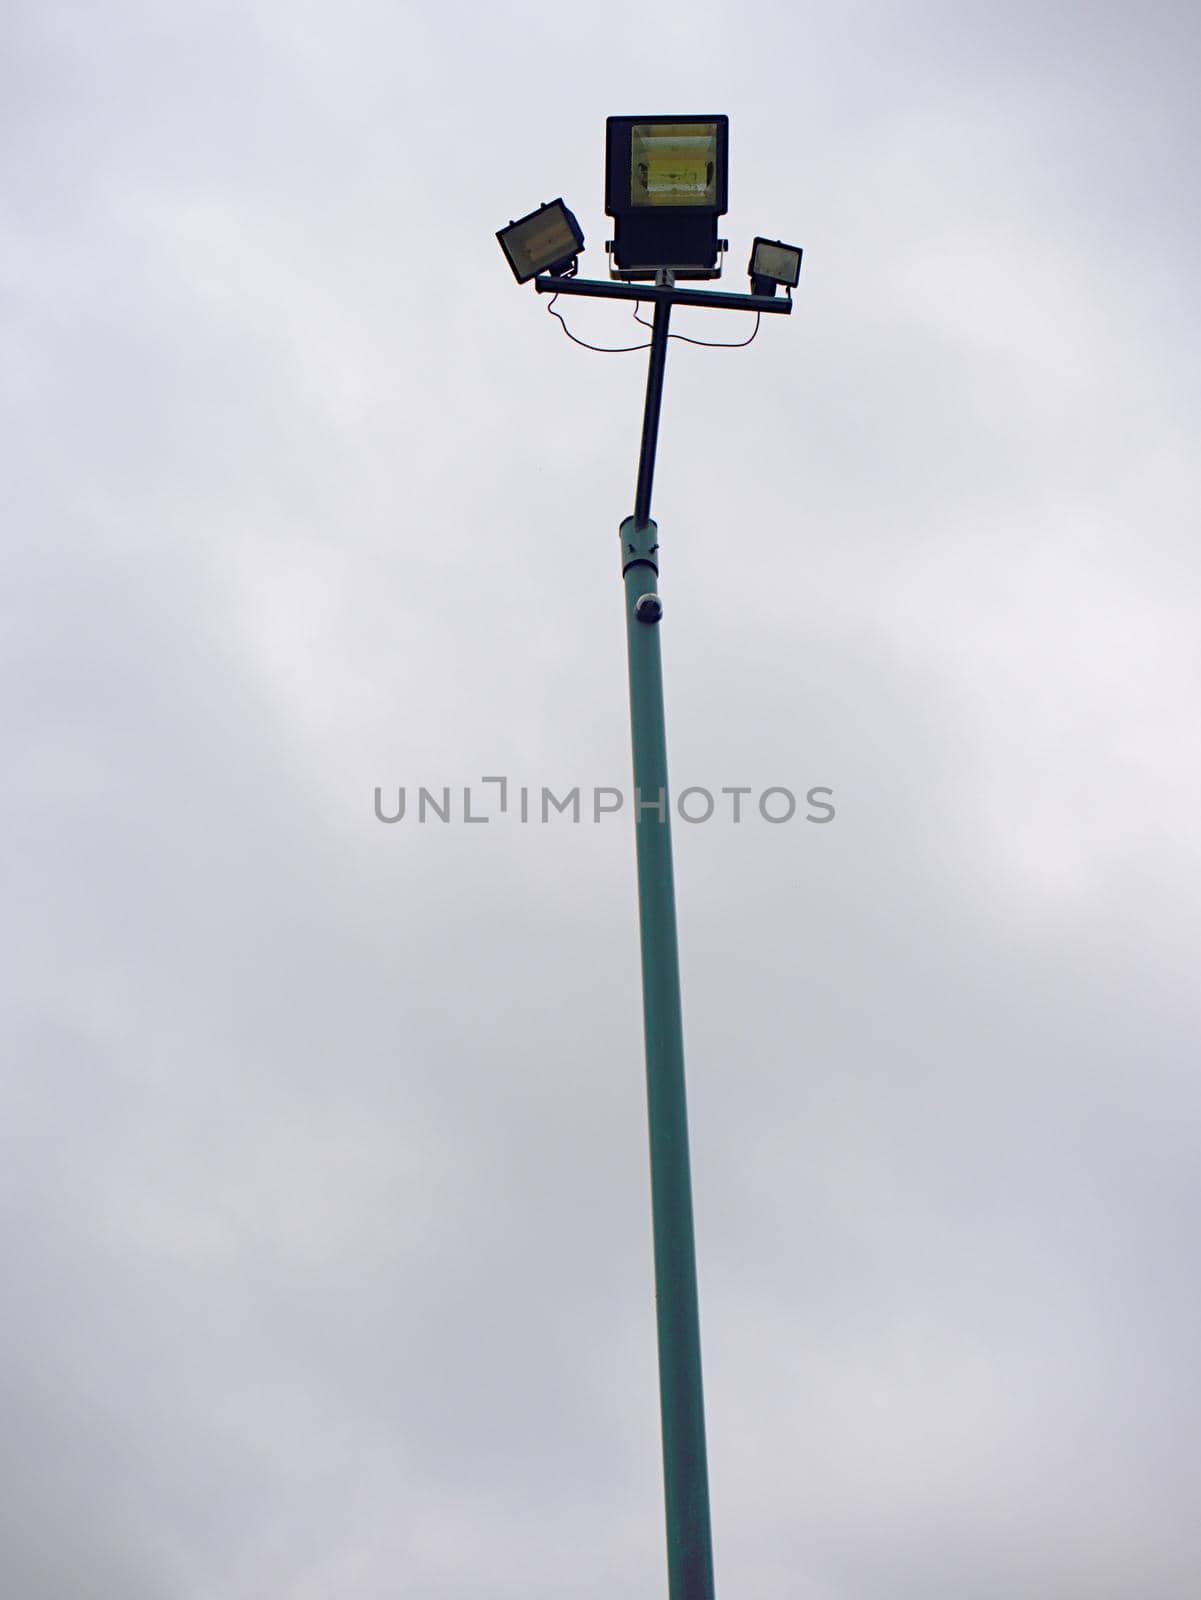 Lonely stadium light or lamp post with Union of light bulb standing alone  by rdonar2